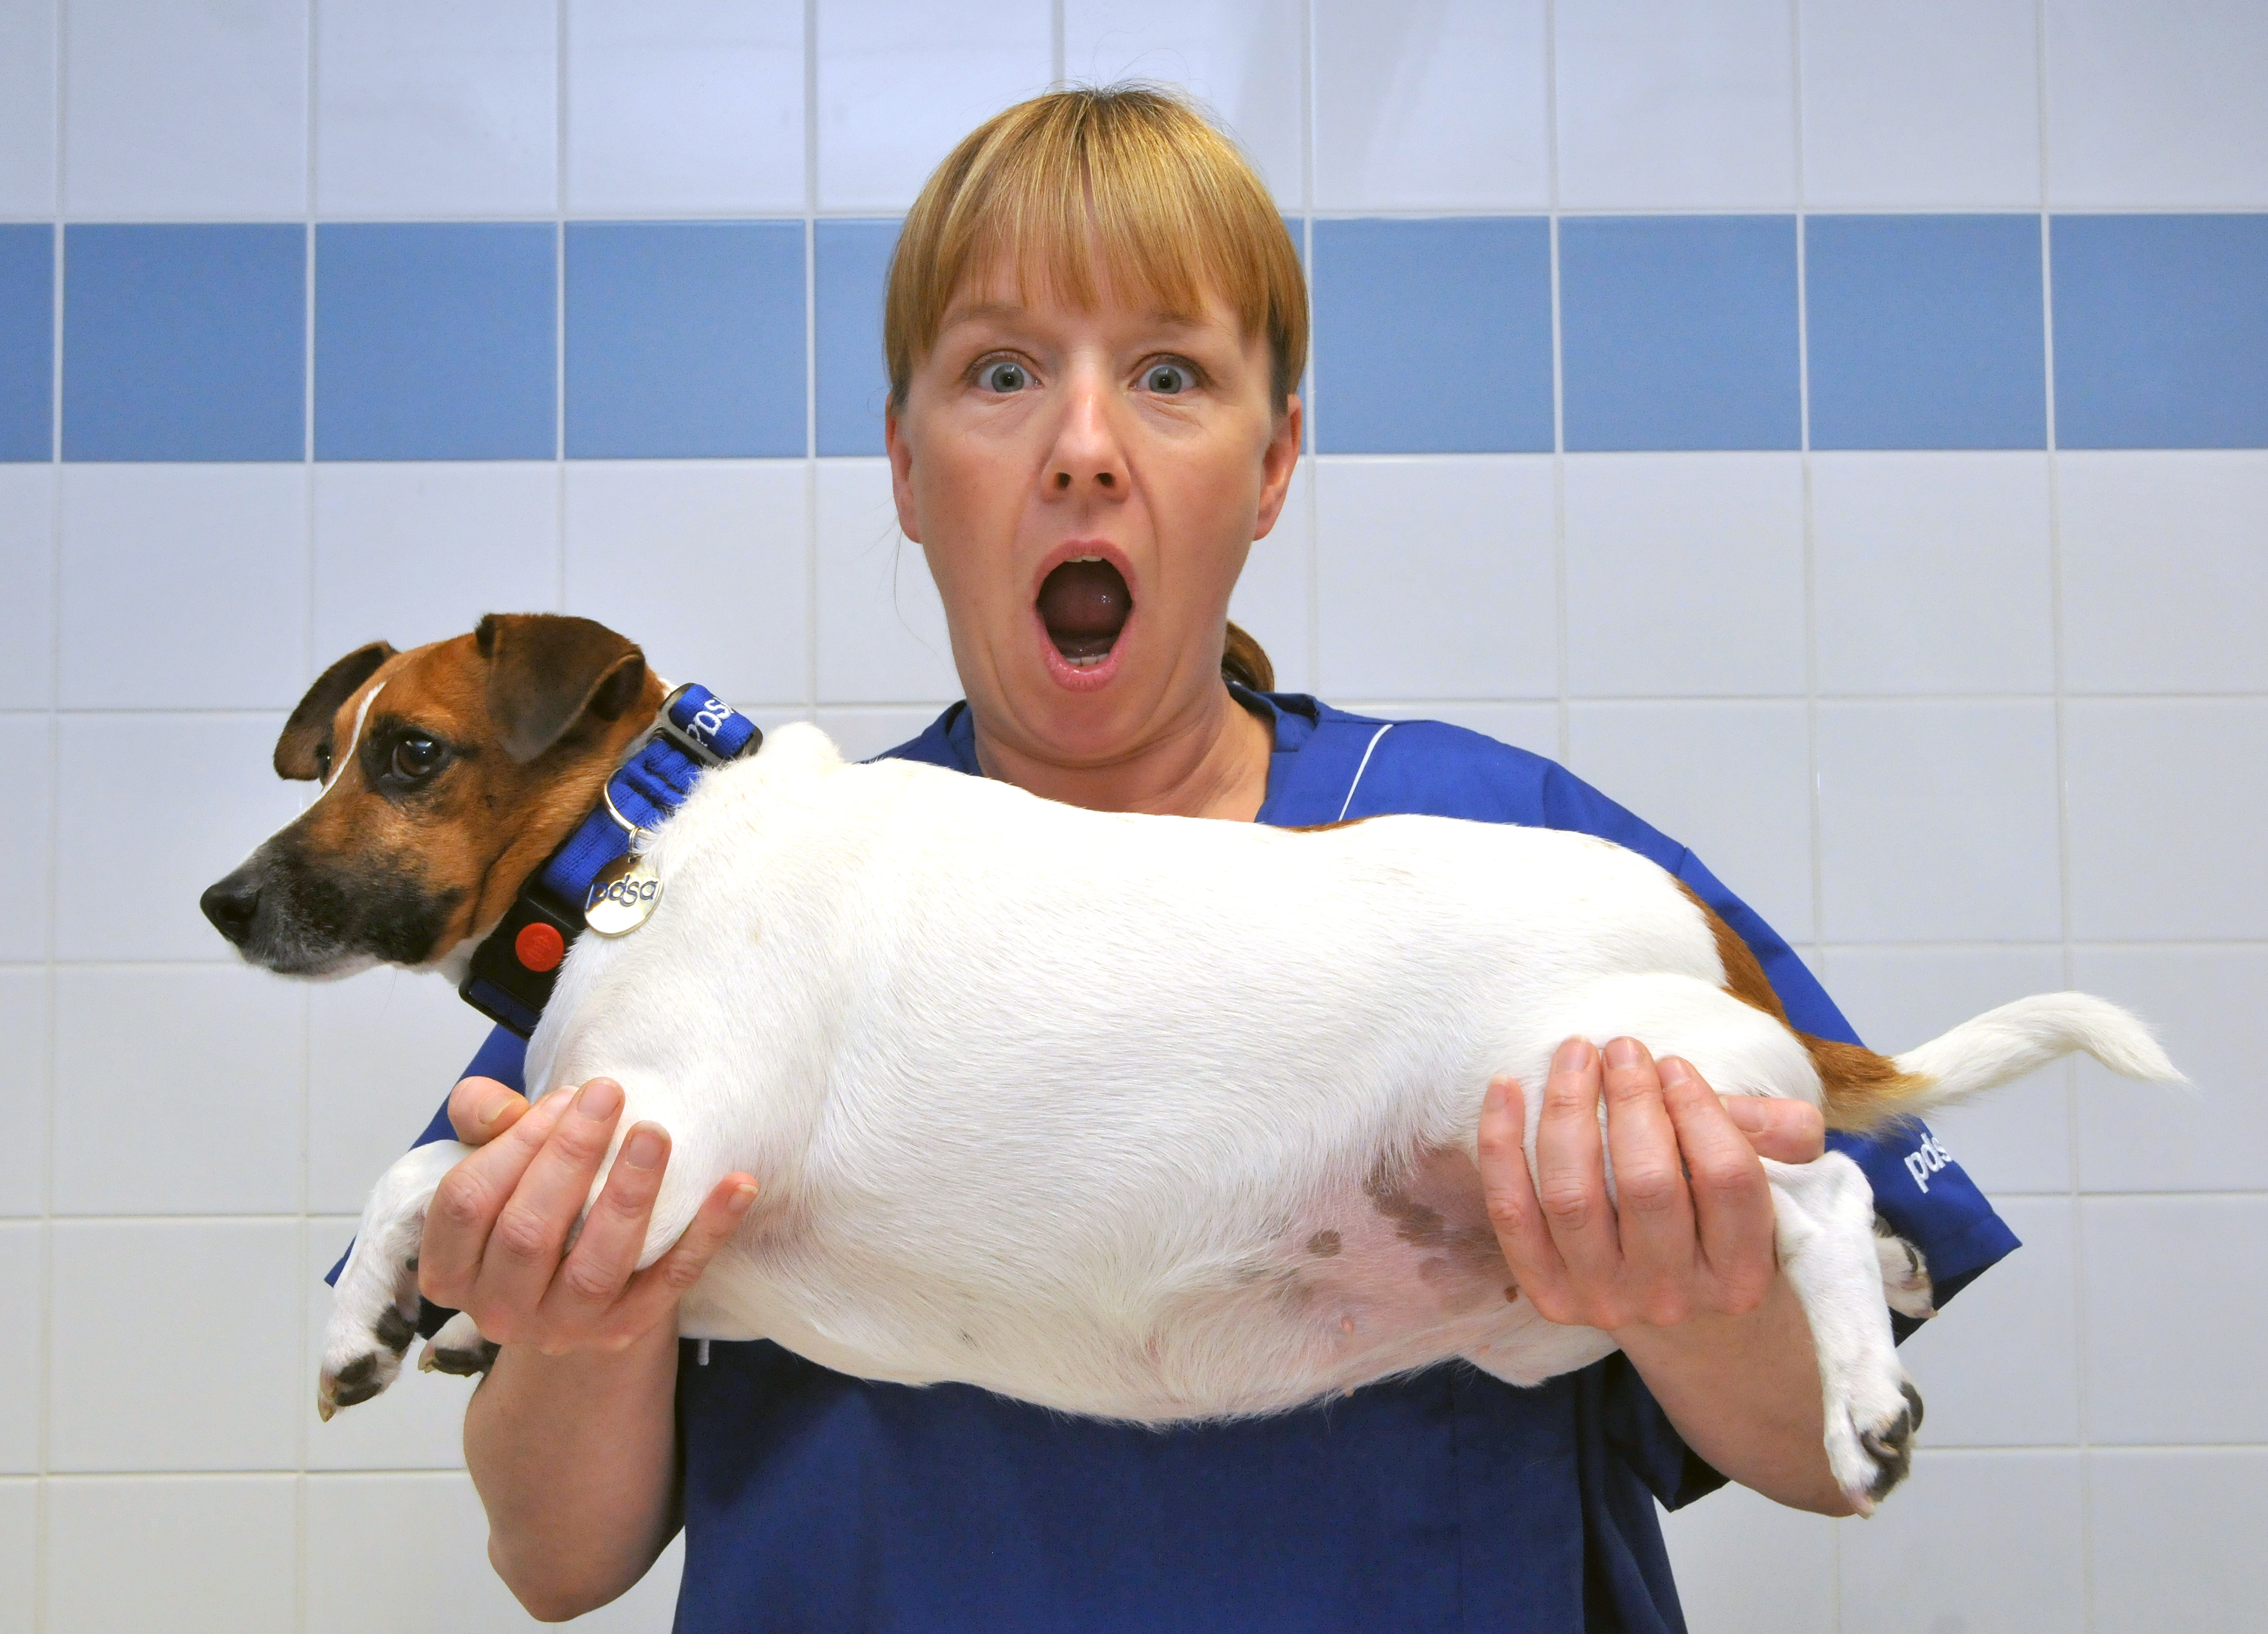 how can obesity be treated in dogs